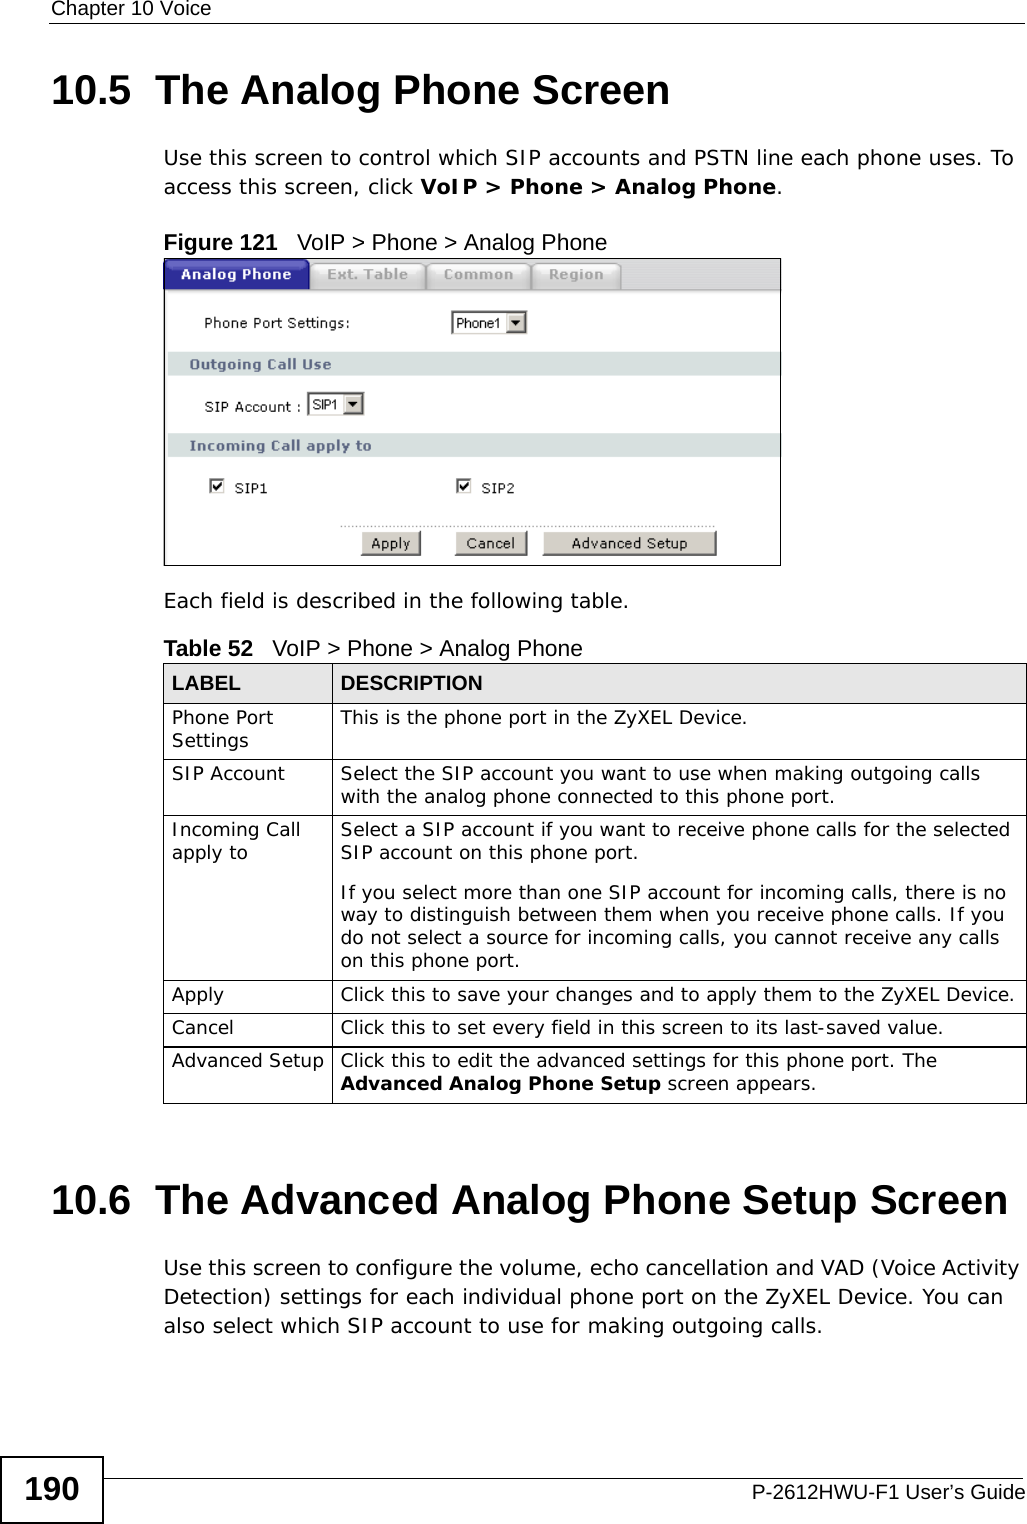 Chapter 10 VoiceP-2612HWU-F1 User’s Guide19010.5  The Analog Phone Screen Use this screen to control which SIP accounts and PSTN line each phone uses. To access this screen, click VoIP &gt; Phone &gt; Analog Phone.Figure 121   VoIP &gt; Phone &gt; Analog PhoneEach field is described in the following table.10.6  The Advanced Analog Phone Setup Screen Use this screen to configure the volume, echo cancellation and VAD (Voice Activity Detection) settings for each individual phone port on the ZyXEL Device. You can also select which SIP account to use for making outgoing calls.Table 52   VoIP &gt; Phone &gt; Analog PhoneLABEL DESCRIPTIONPhone Port Settings This is the phone port in the ZyXEL Device.SIP Account Select the SIP account you want to use when making outgoing calls with the analog phone connected to this phone port. Incoming Call apply to Select a SIP account if you want to receive phone calls for the selected SIP account on this phone port.If you select more than one SIP account for incoming calls, there is no way to distinguish between them when you receive phone calls. If you do not select a source for incoming calls, you cannot receive any calls on this phone port.Apply Click this to save your changes and to apply them to the ZyXEL Device.Cancel Click this to set every field in this screen to its last-saved value.Advanced Setup Click this to edit the advanced settings for this phone port. The Advanced Analog Phone Setup screen appears.